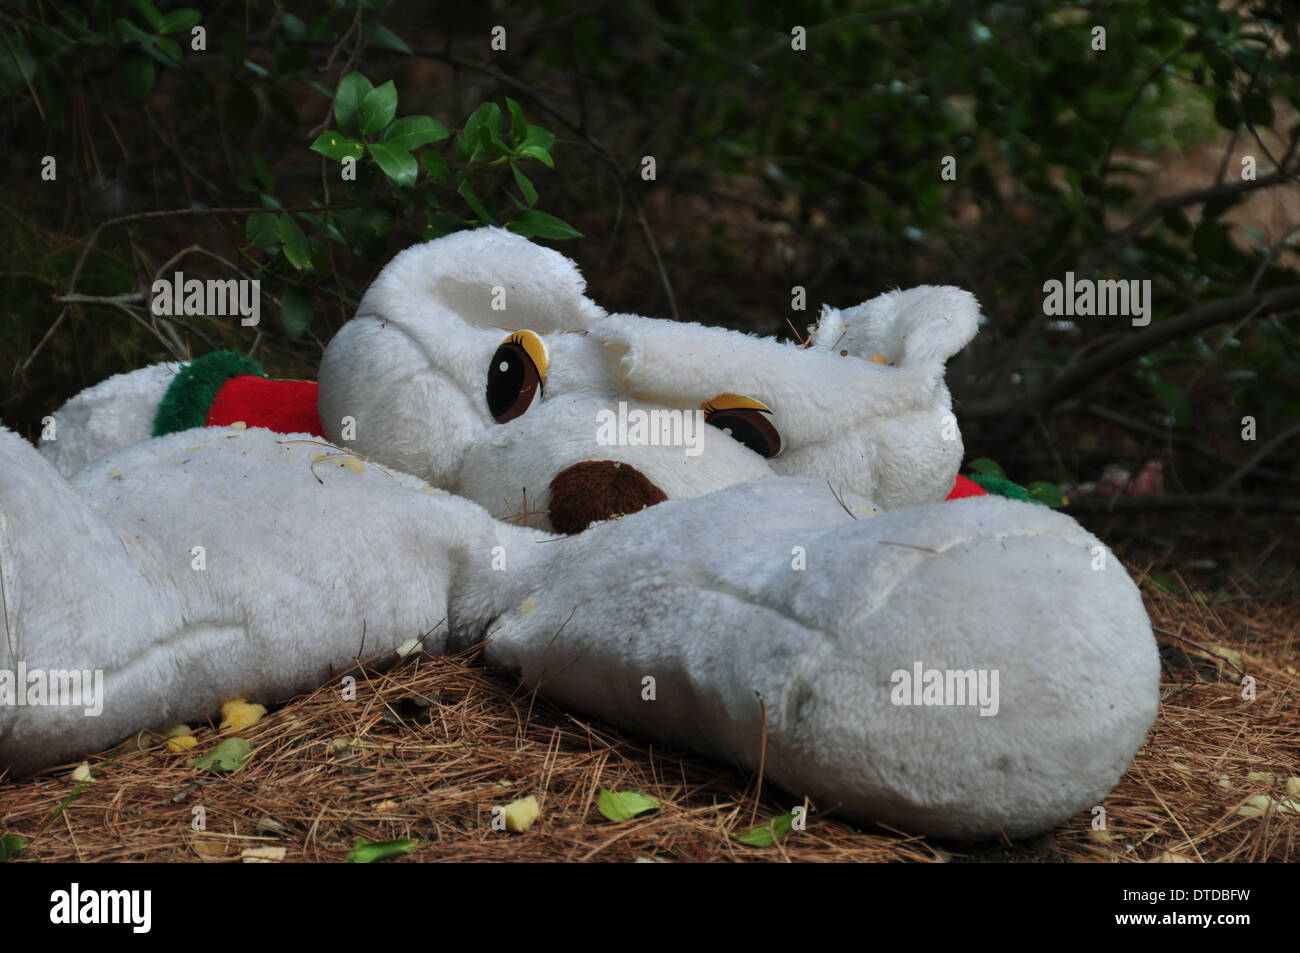 Torn teddy bear stuffed animal toy in a forest. Stock Photo